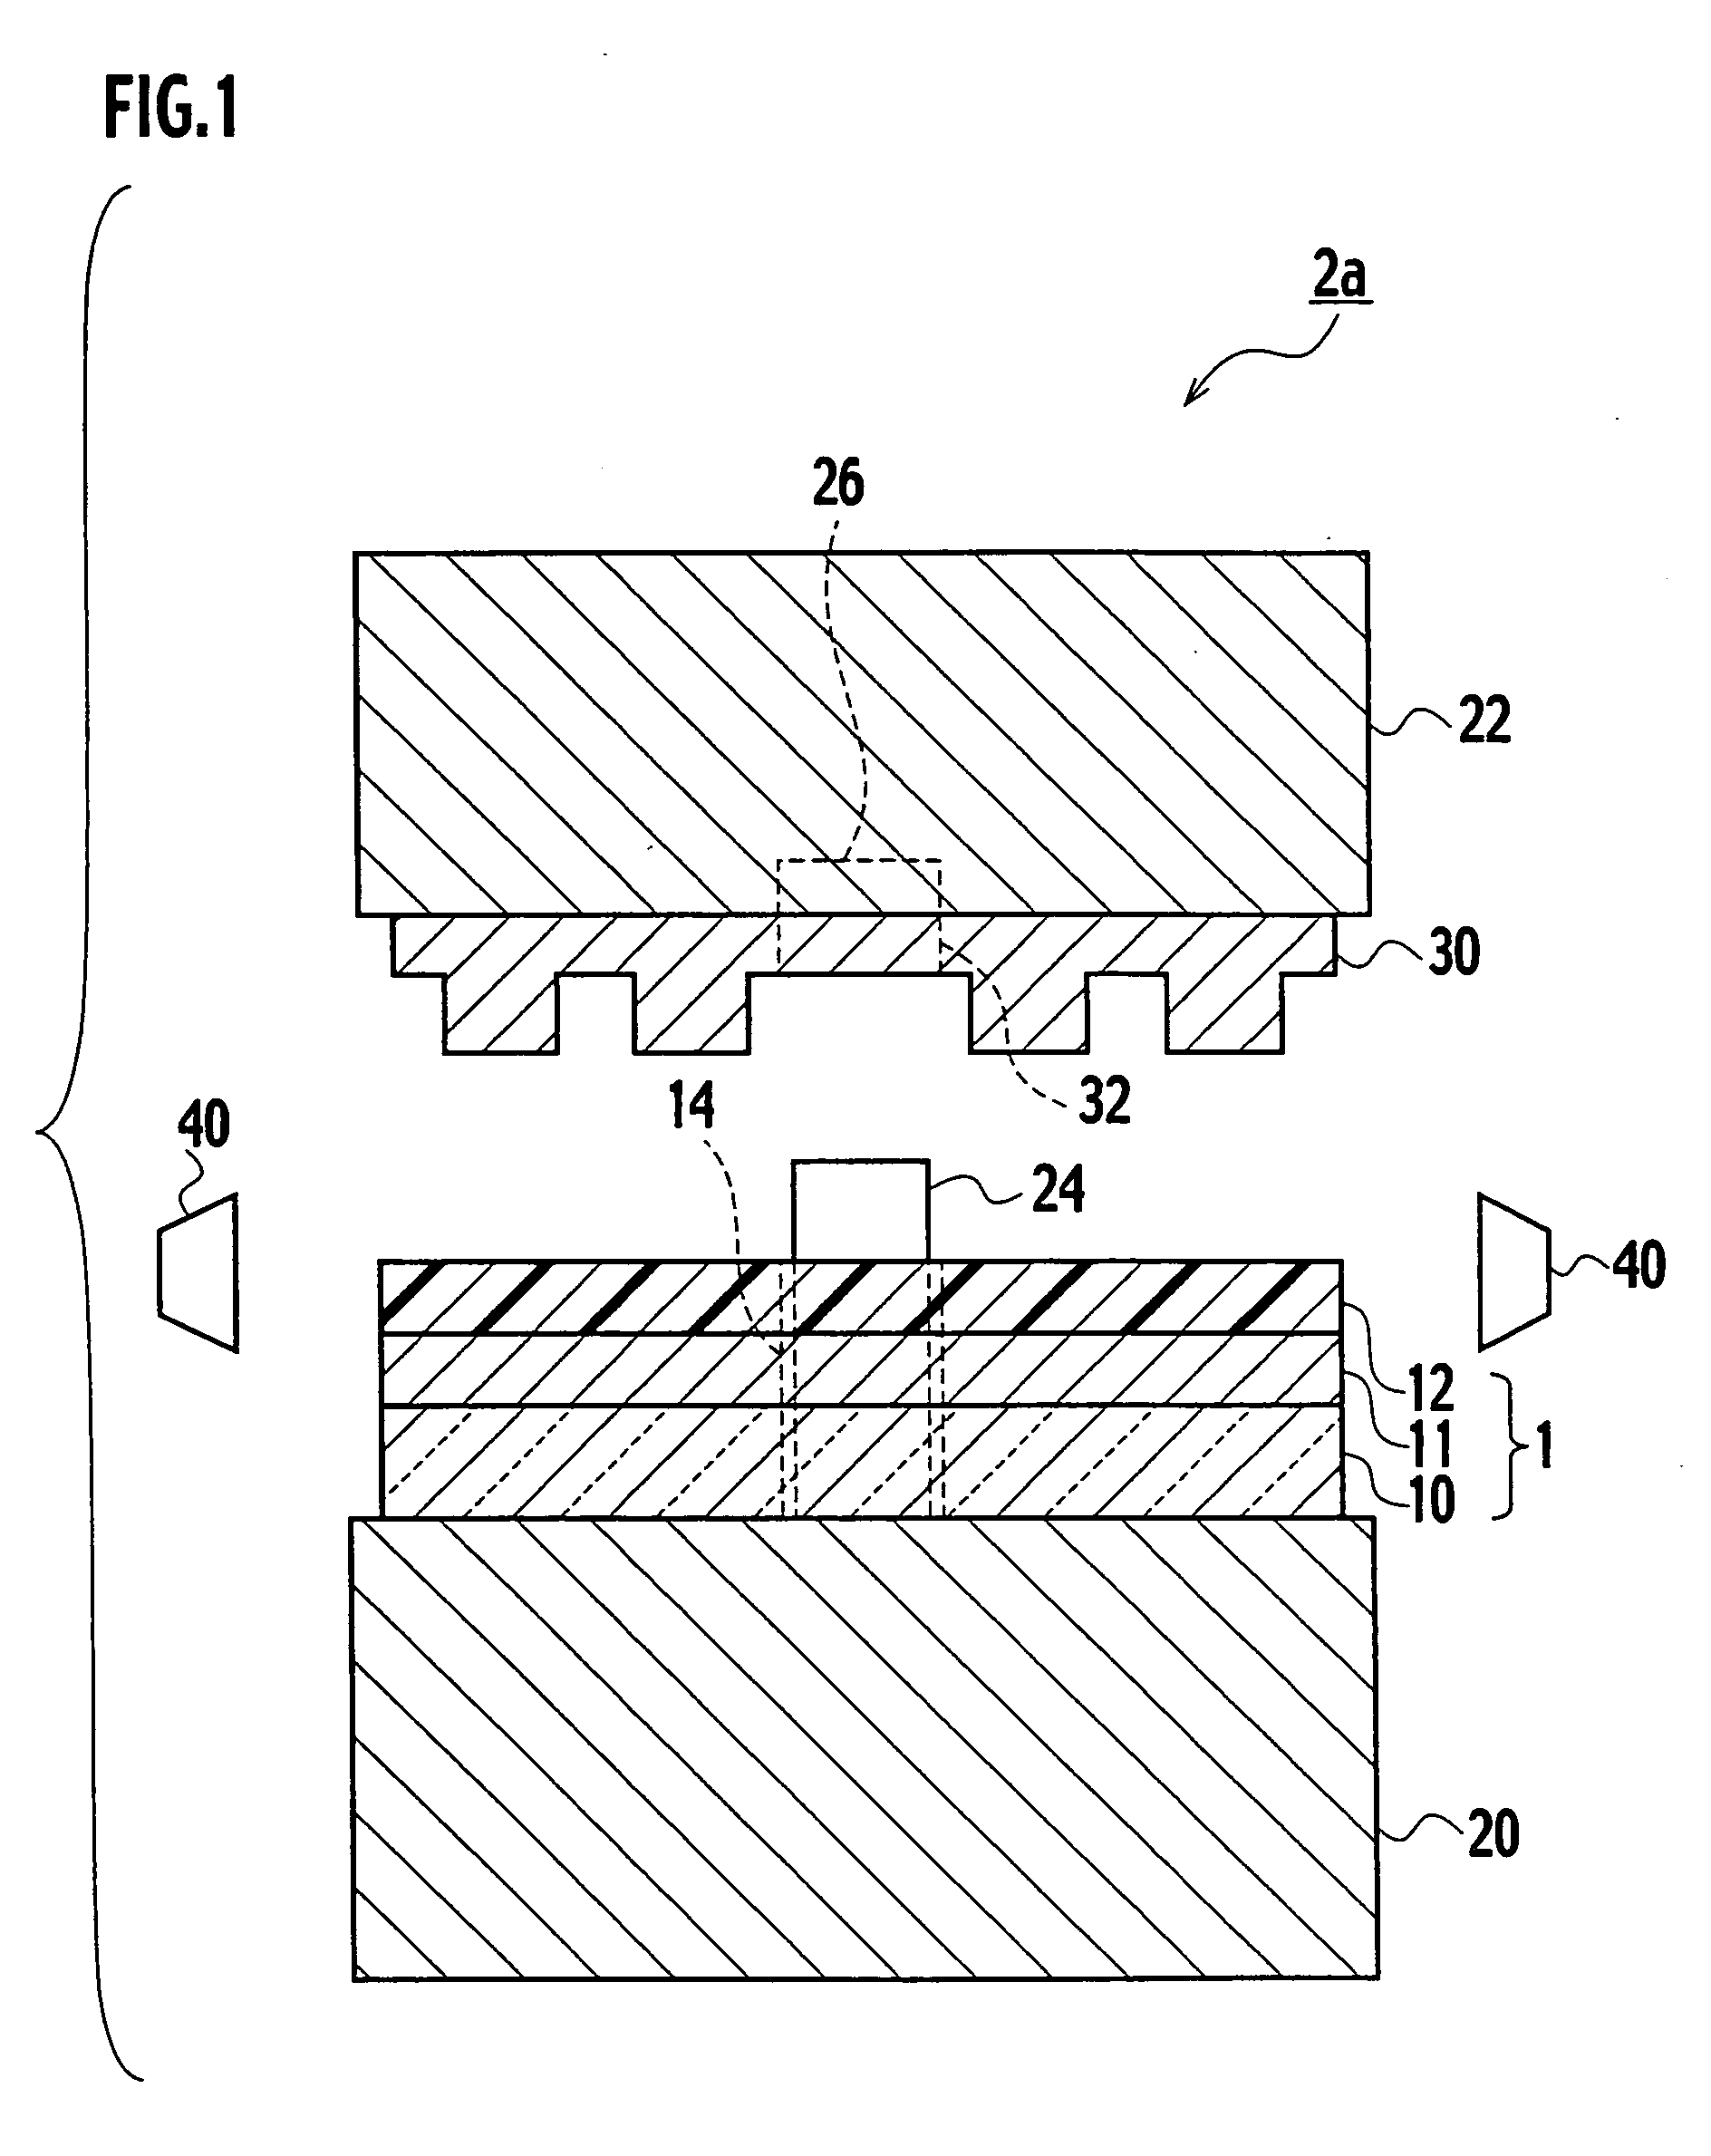 Imprint apparatus and method for imprinting